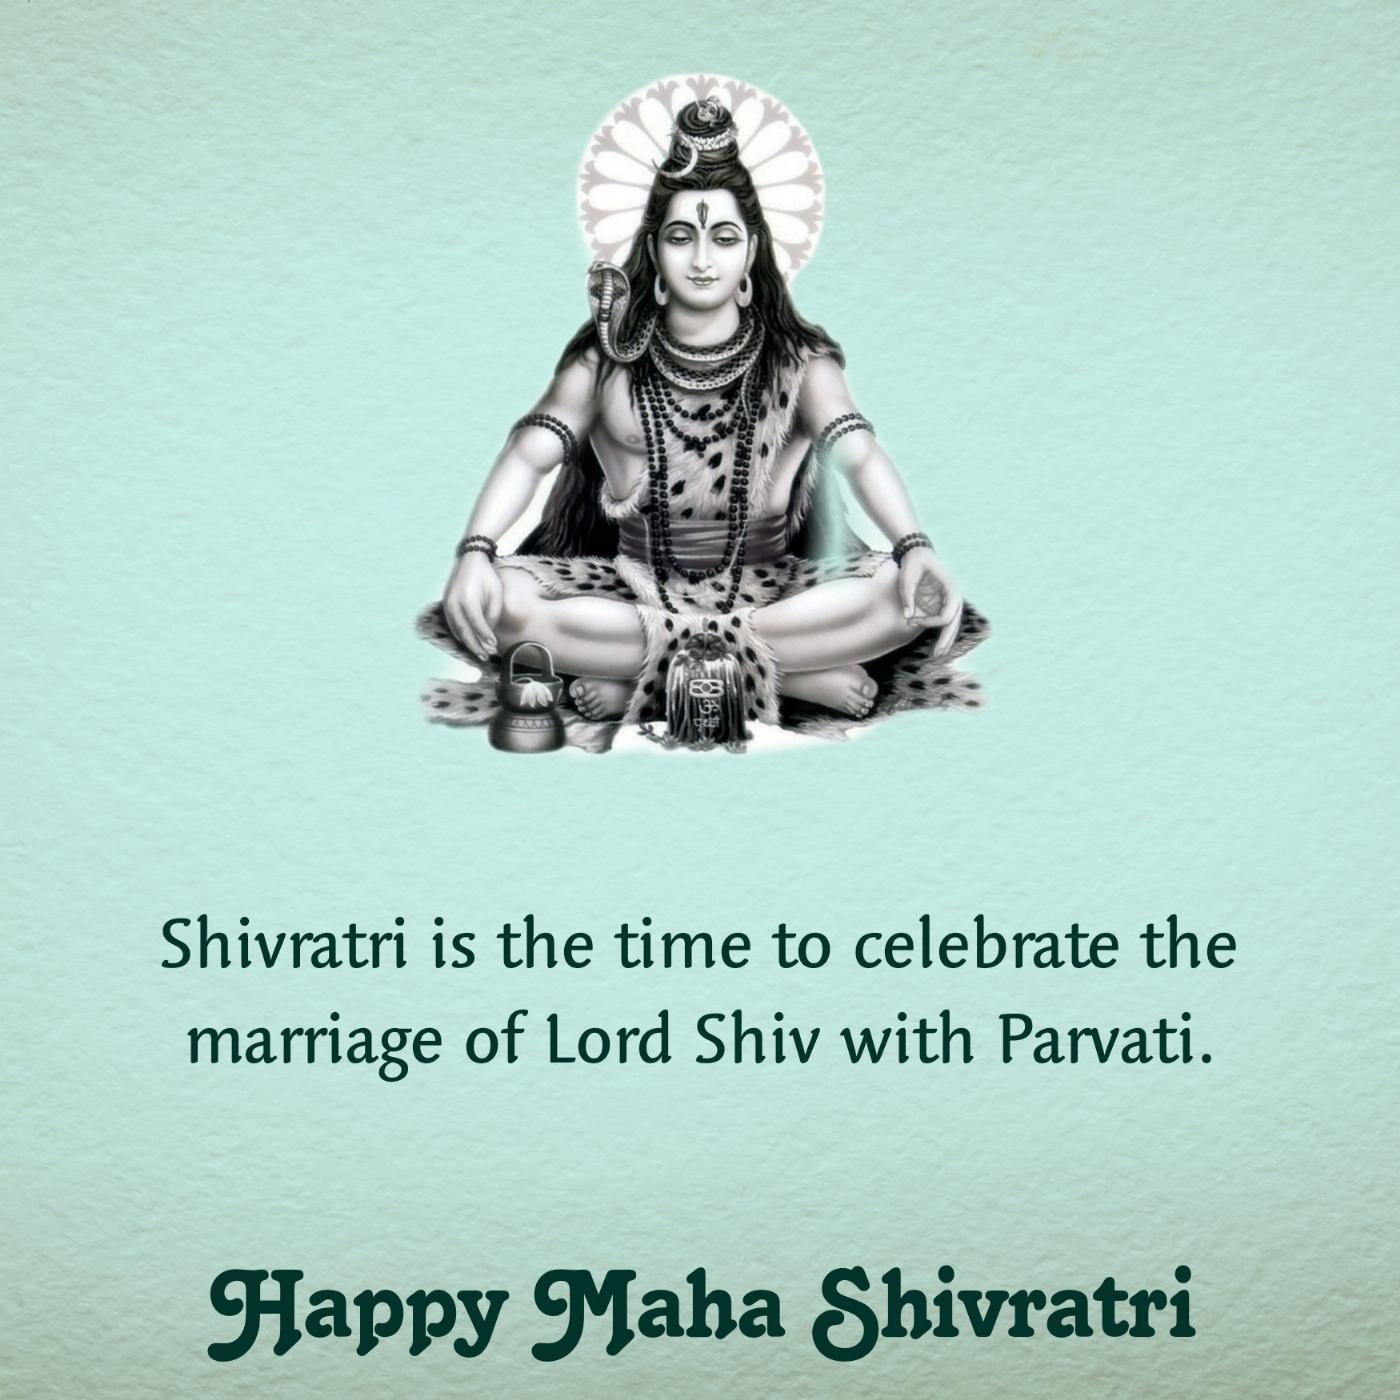 Shivratri is the time to celebrate the marriage of Lord Shiv with Parvati